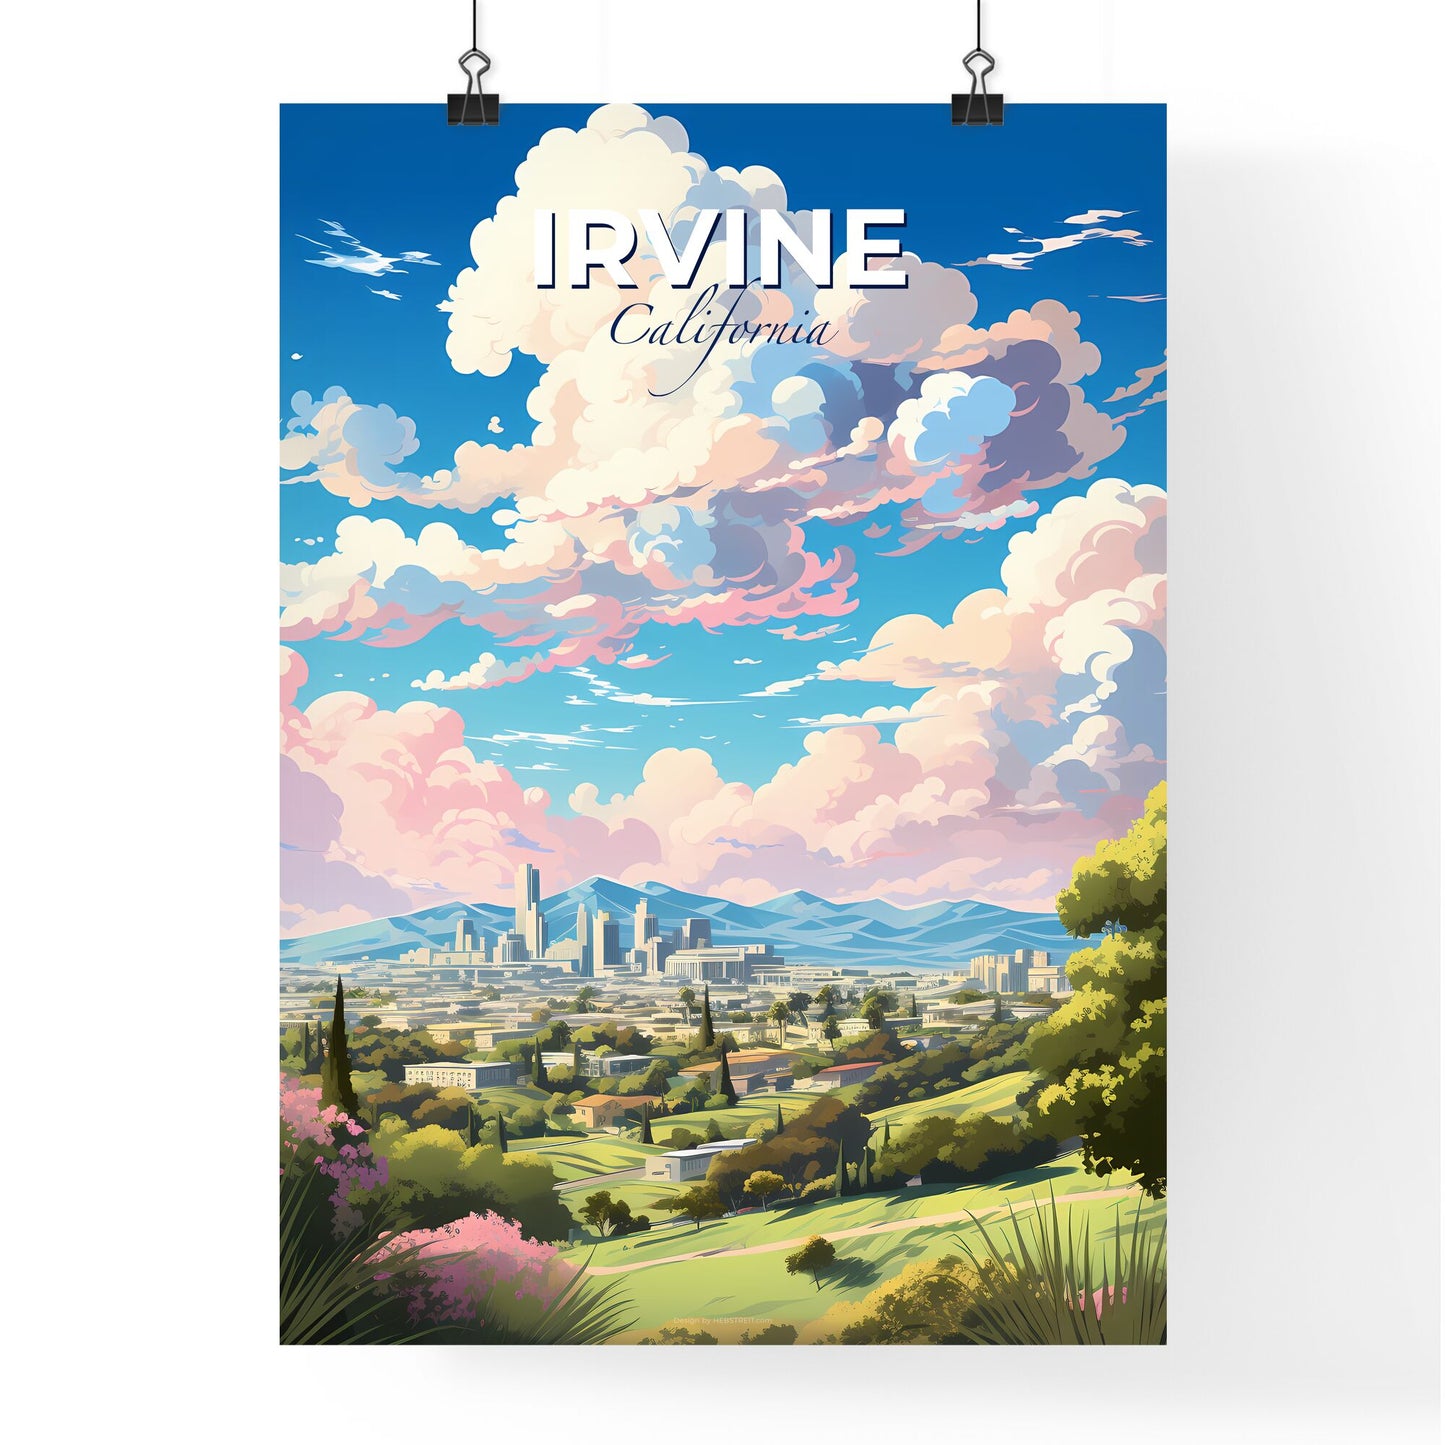 Irvine California Skyline - A Landscape Of A City With Trees And Mountains - Customizable Travel Gift Default Title